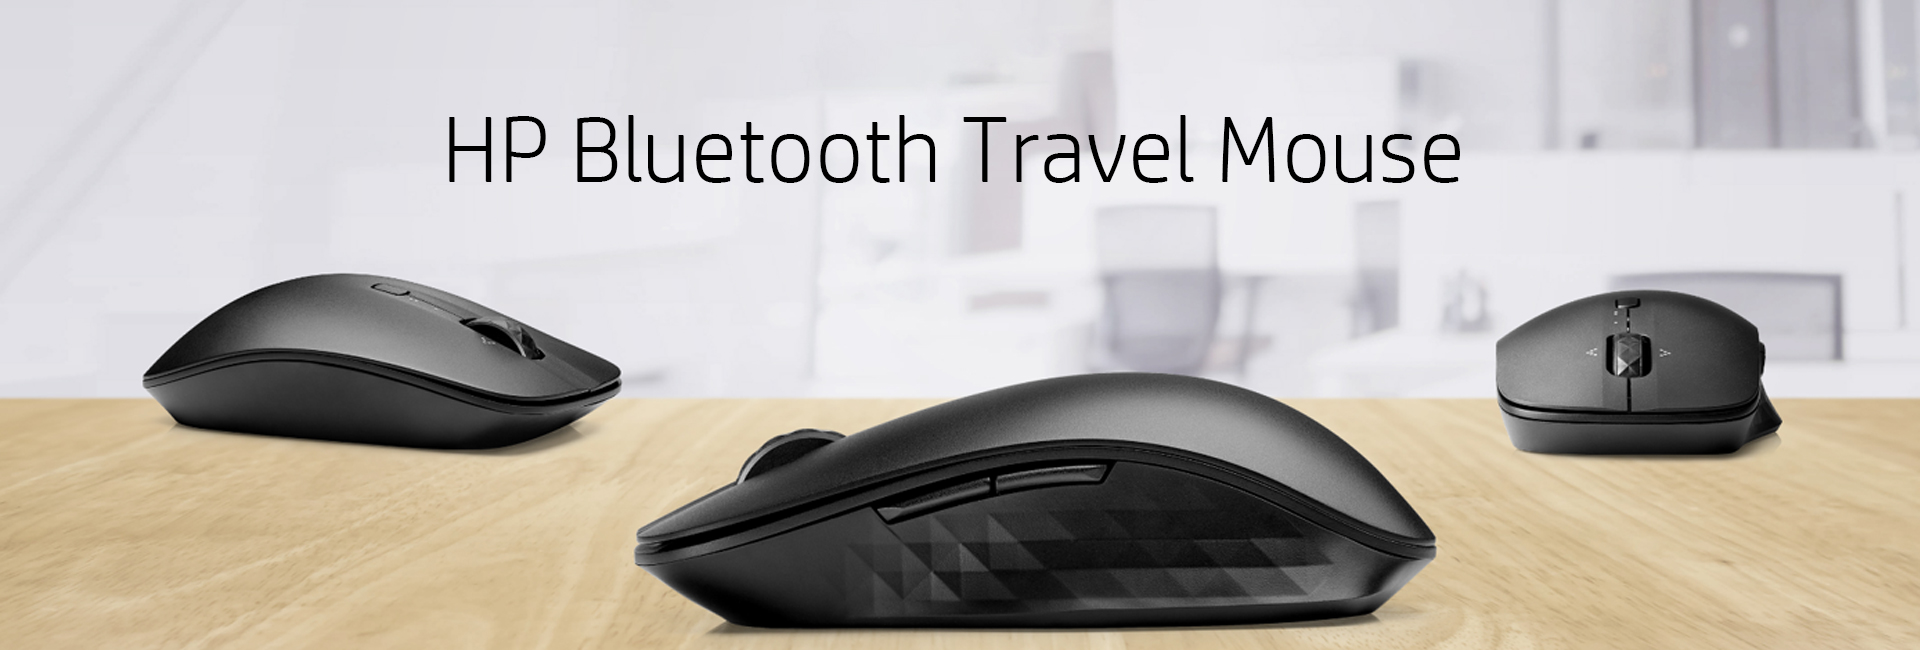 HP Bluetooth Travel Mouse (6SP30UT#ABA)